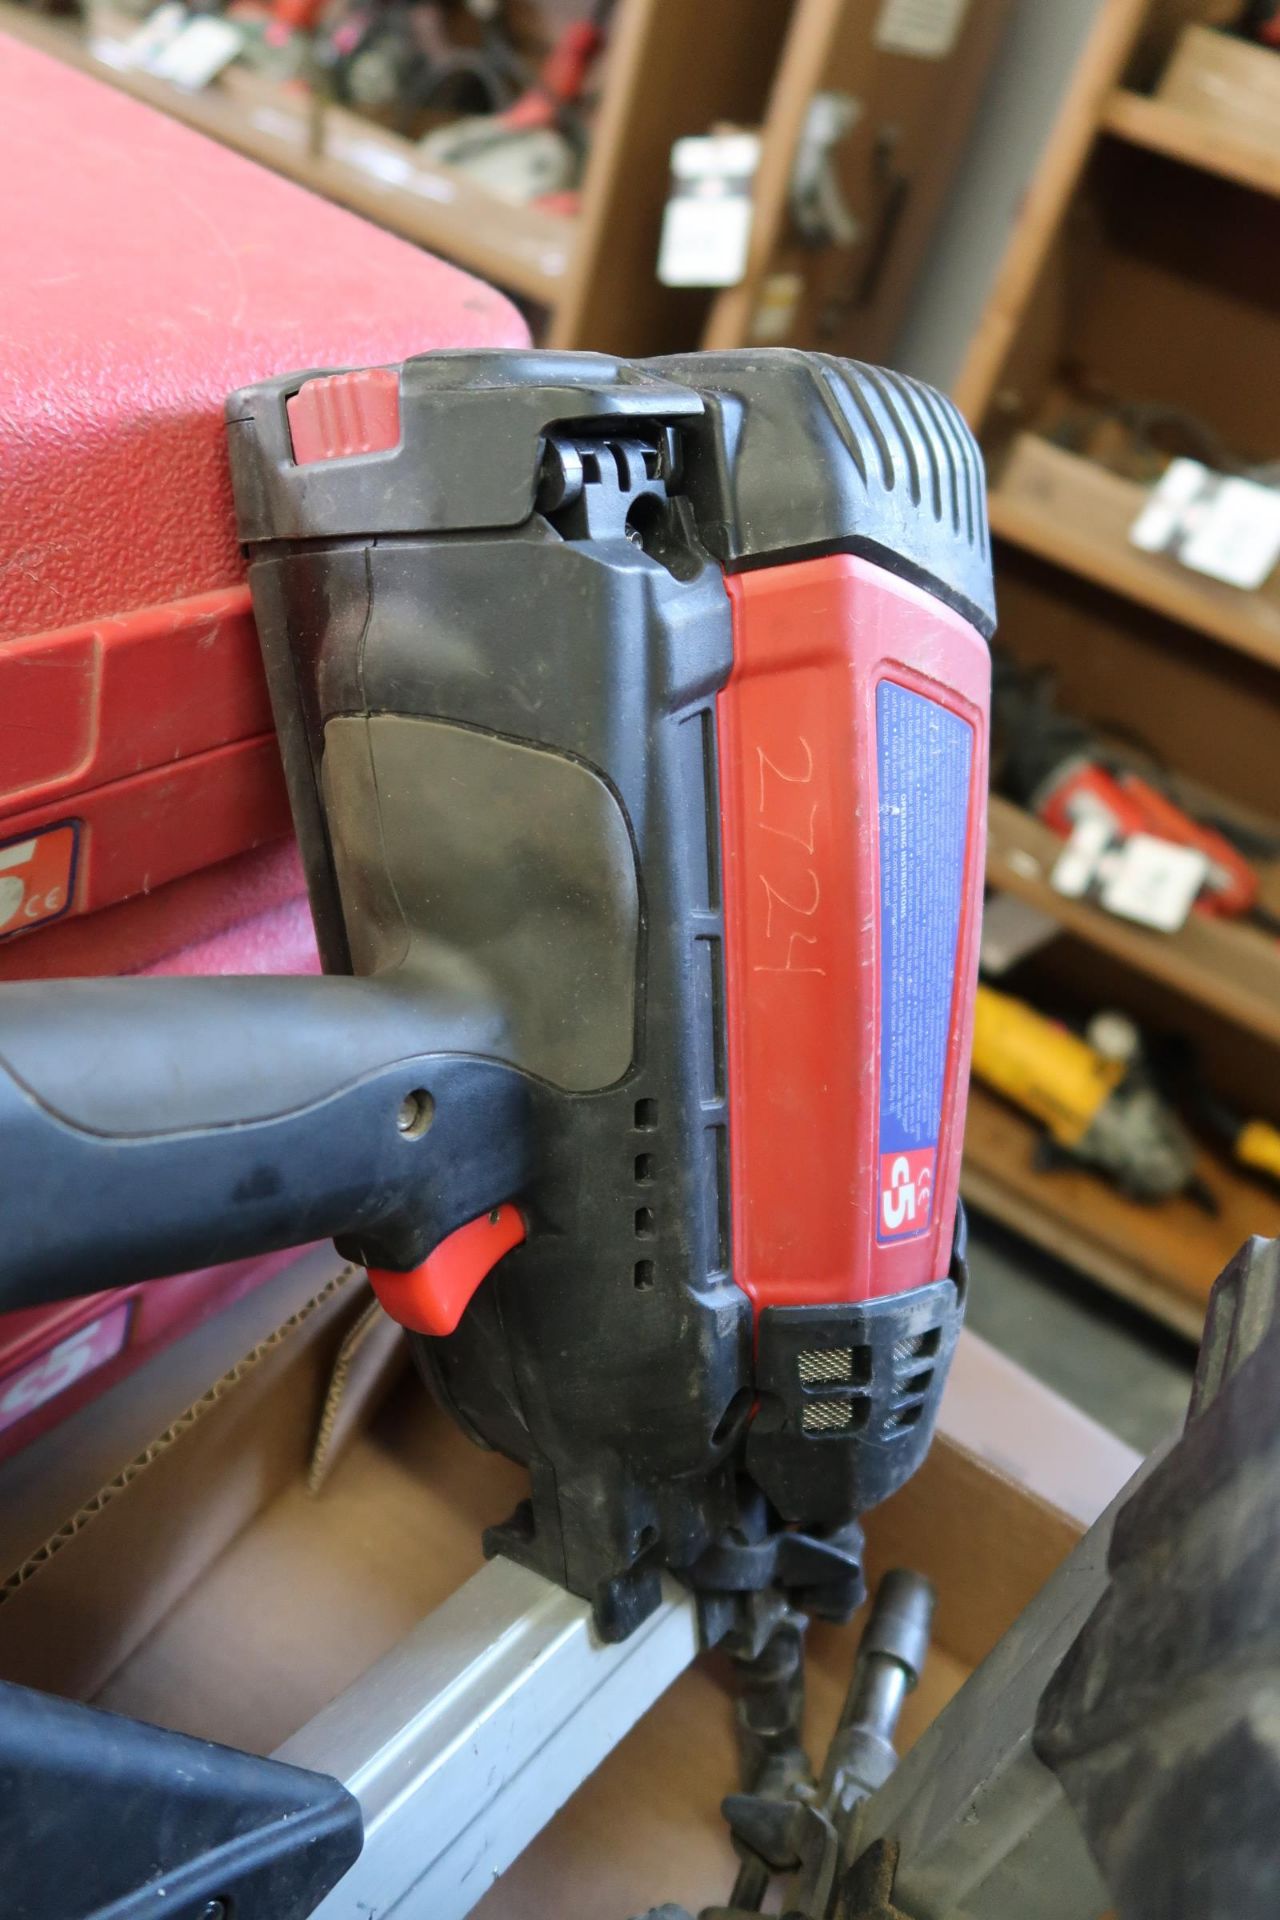 Powers "Trak-It C5" Cordless Nailers (2 - NO BATTERIES OR CHARGERS) (SOLD AS-IS - NO WARRANTY) - Image 3 of 4